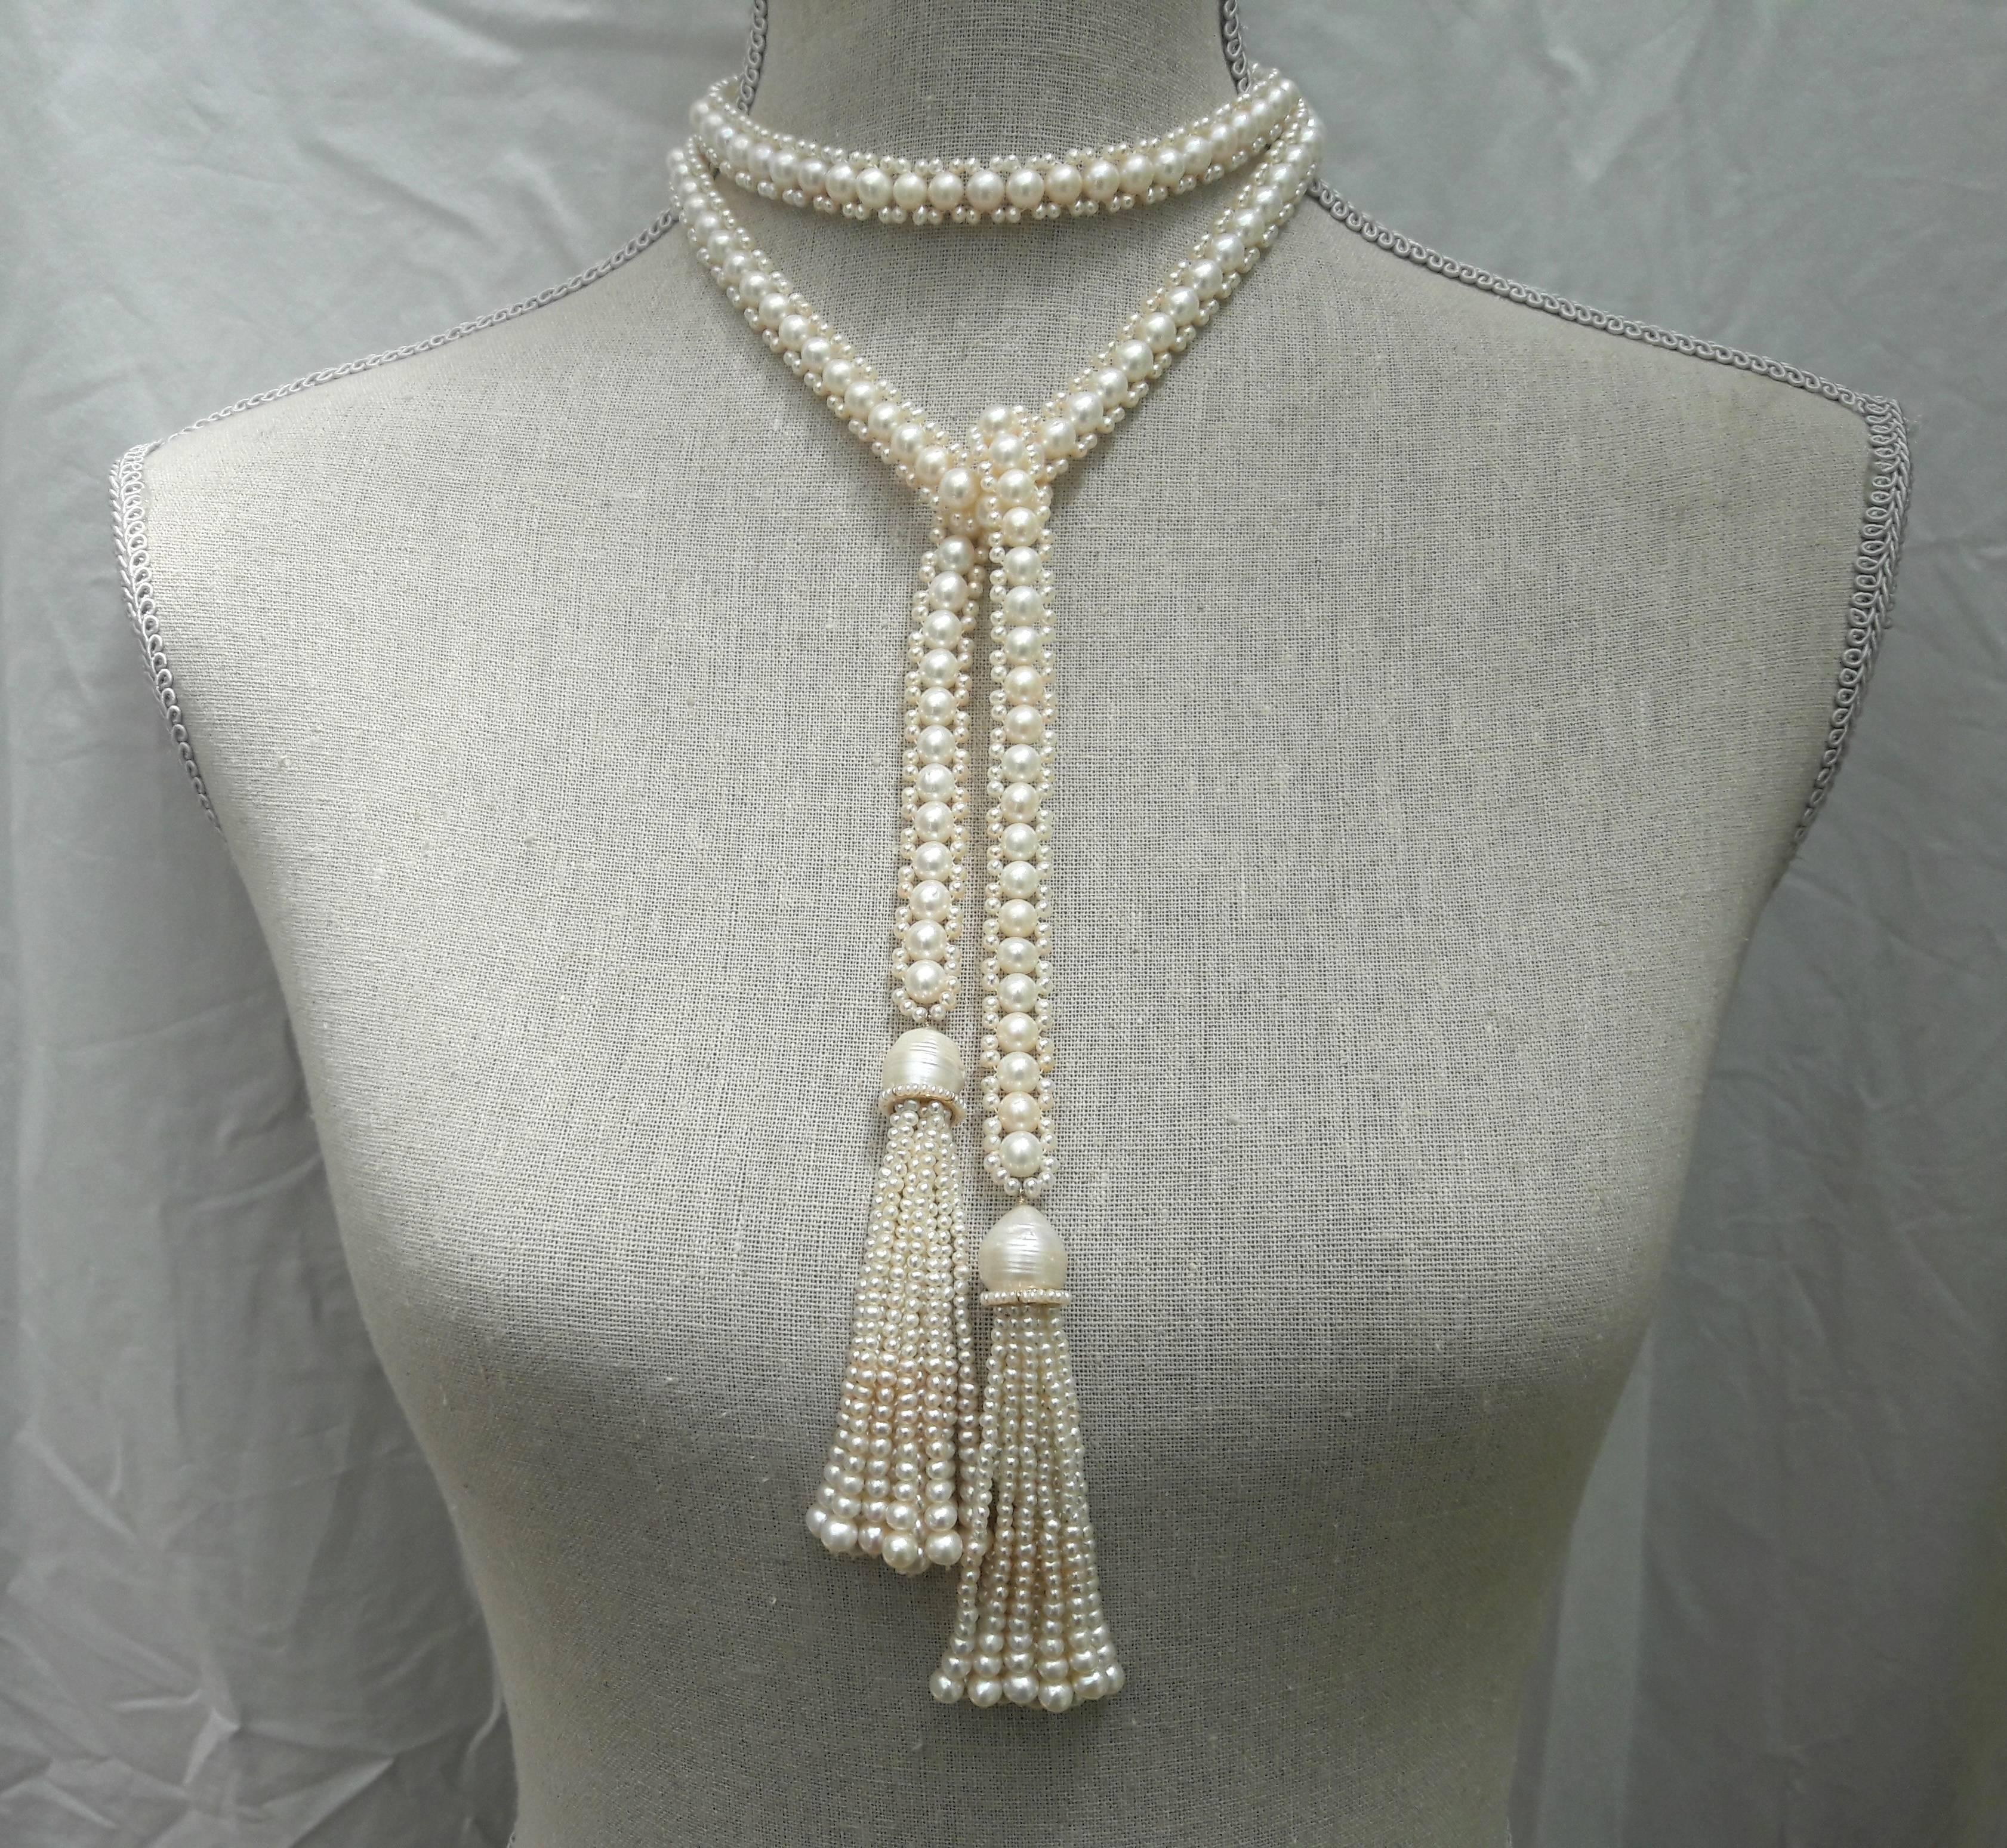 Unique, intricately woven handmade rope sautoir made of 6.5mm and 2.5mm white cultured pearls. Tassels are topped with large baroque pearls, followed by a 14k yellow gold rondelle hand decorated with fine seed pearls and finished with subtlety